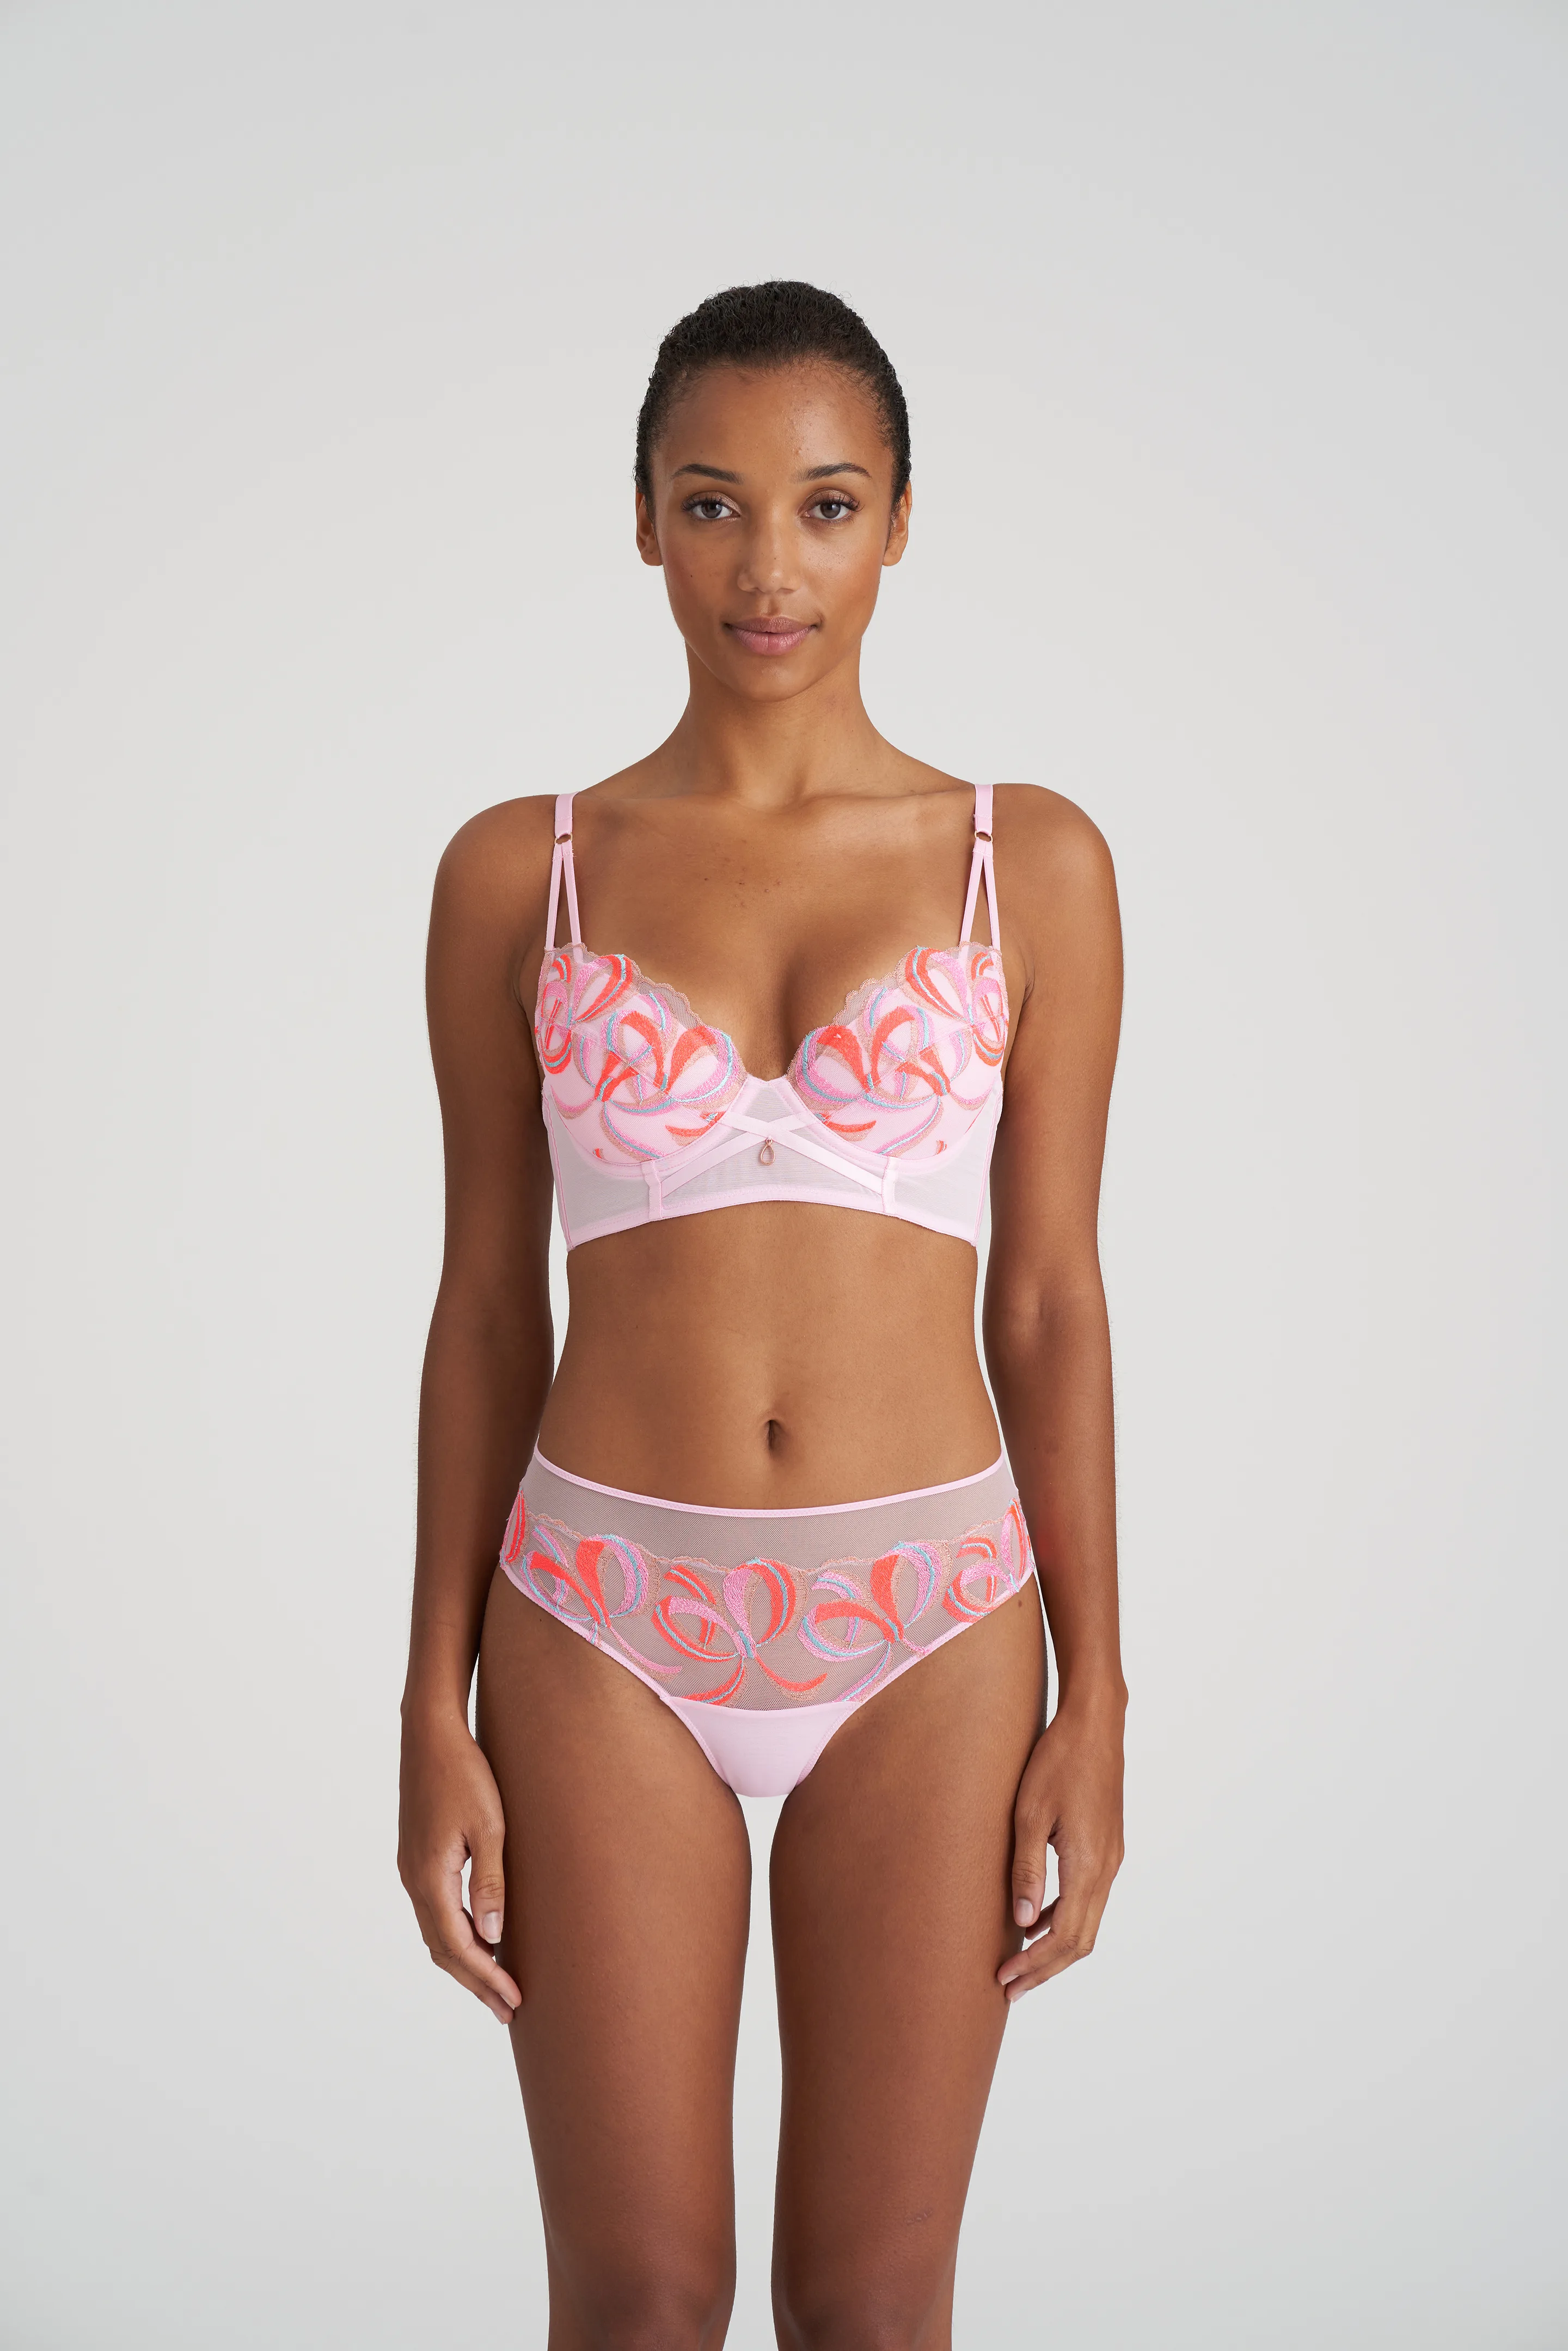 Marie Jo Avero Bra (Caffe, Black, Pearly Pink, Natural, Scarlet) – Lily Pad  Lingerie